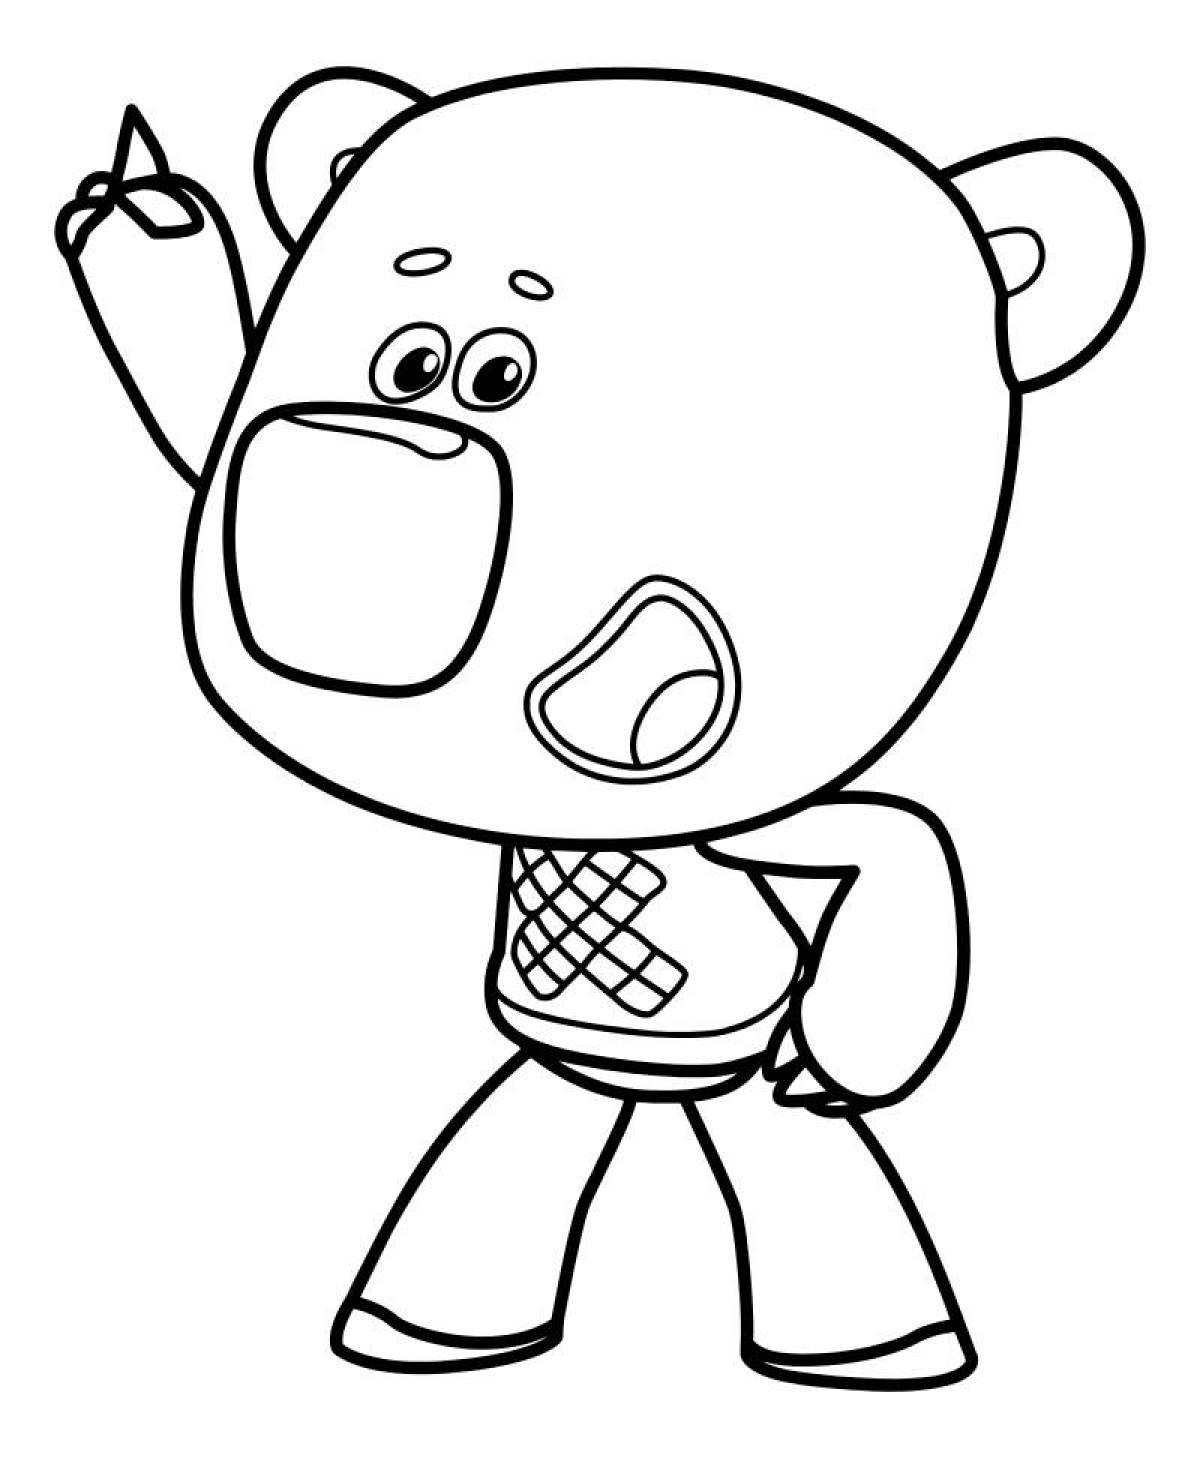 Huggable bears coloring pages for kids